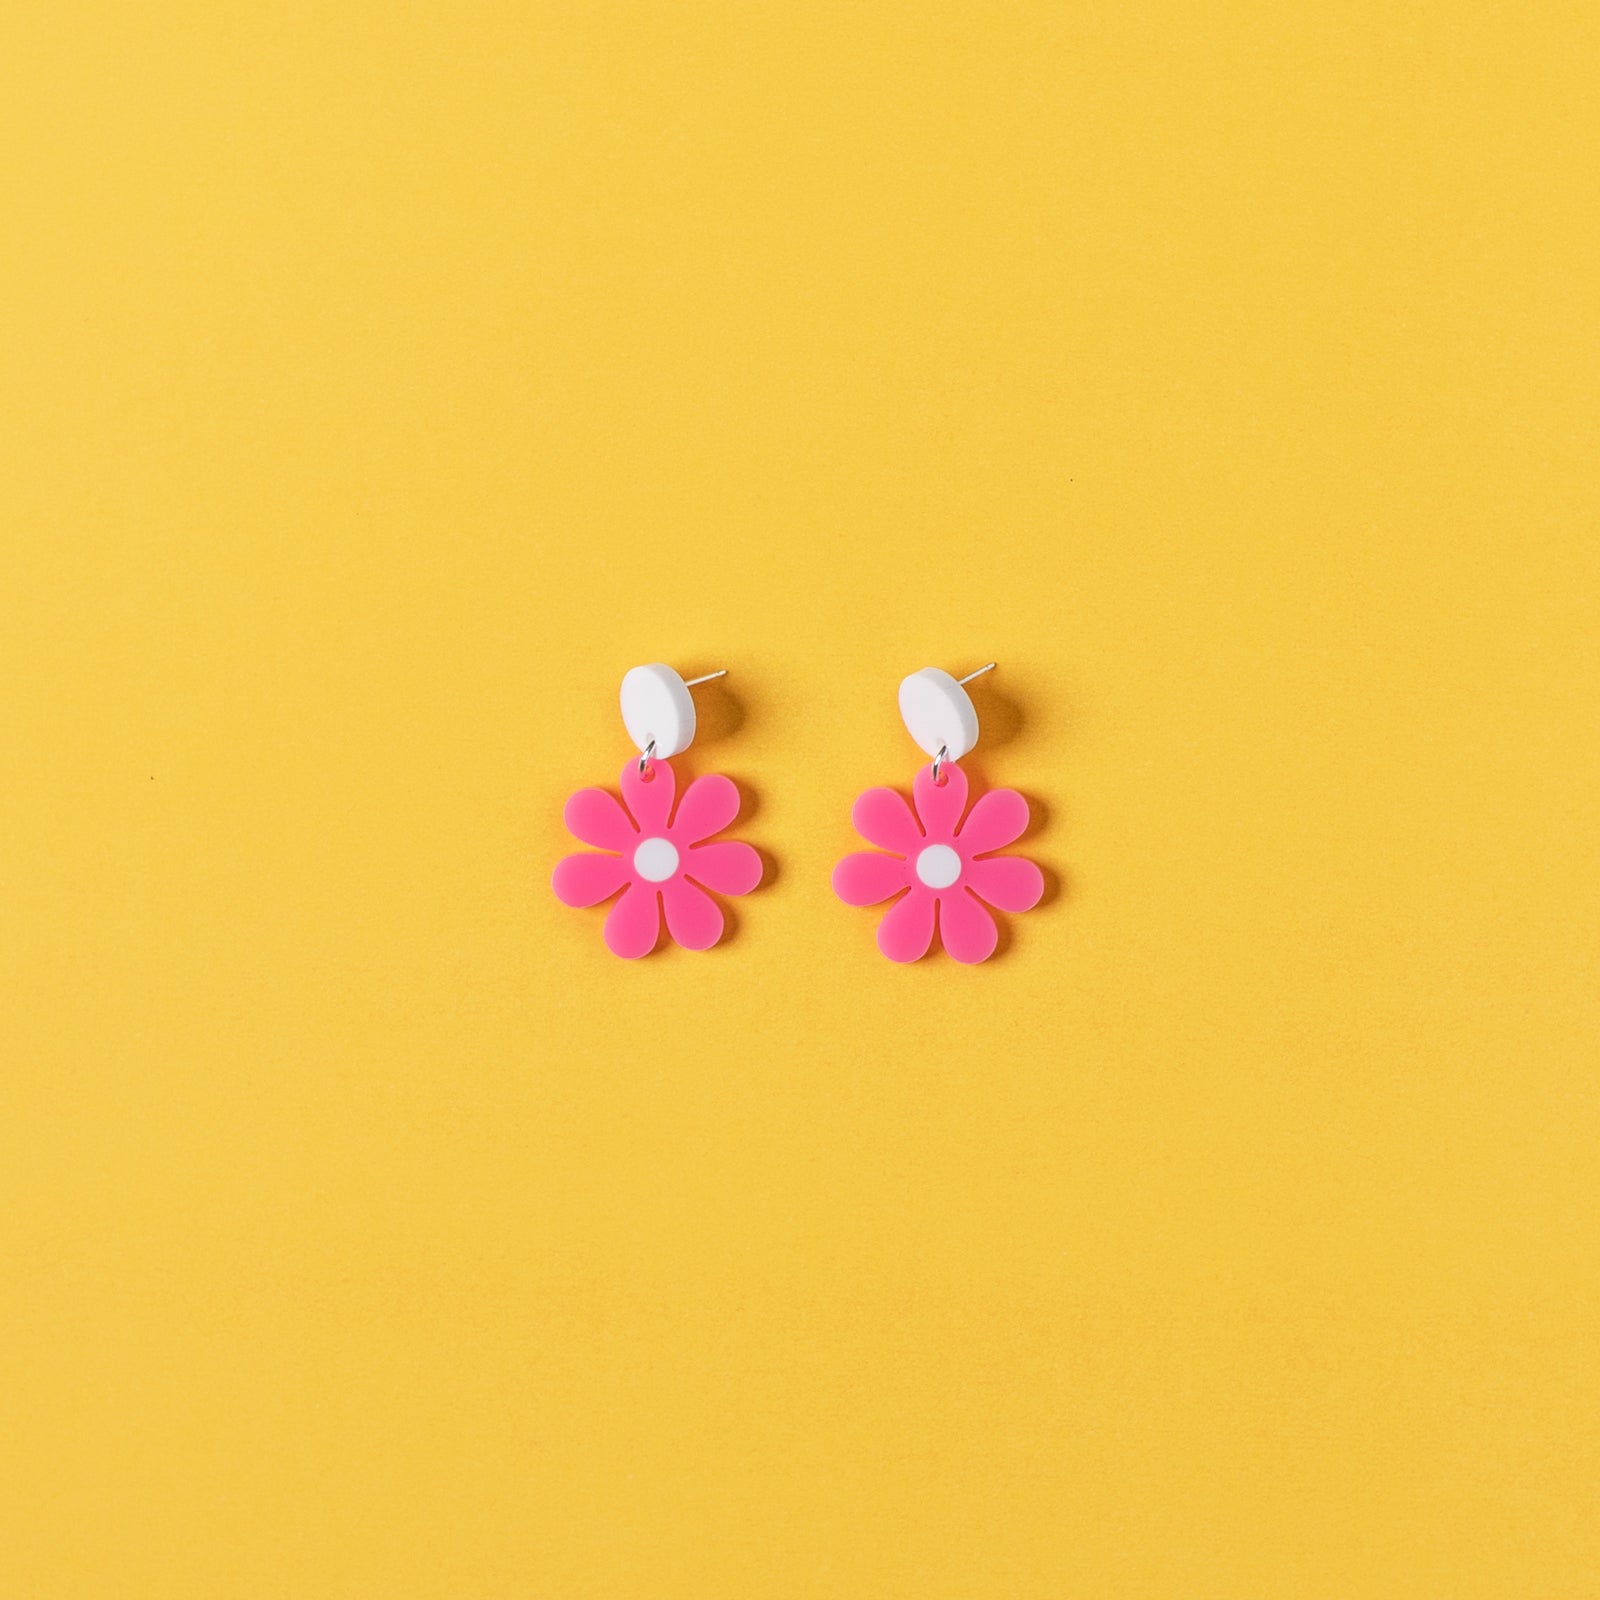 The Baby Daisy Hanging Stud Earrings